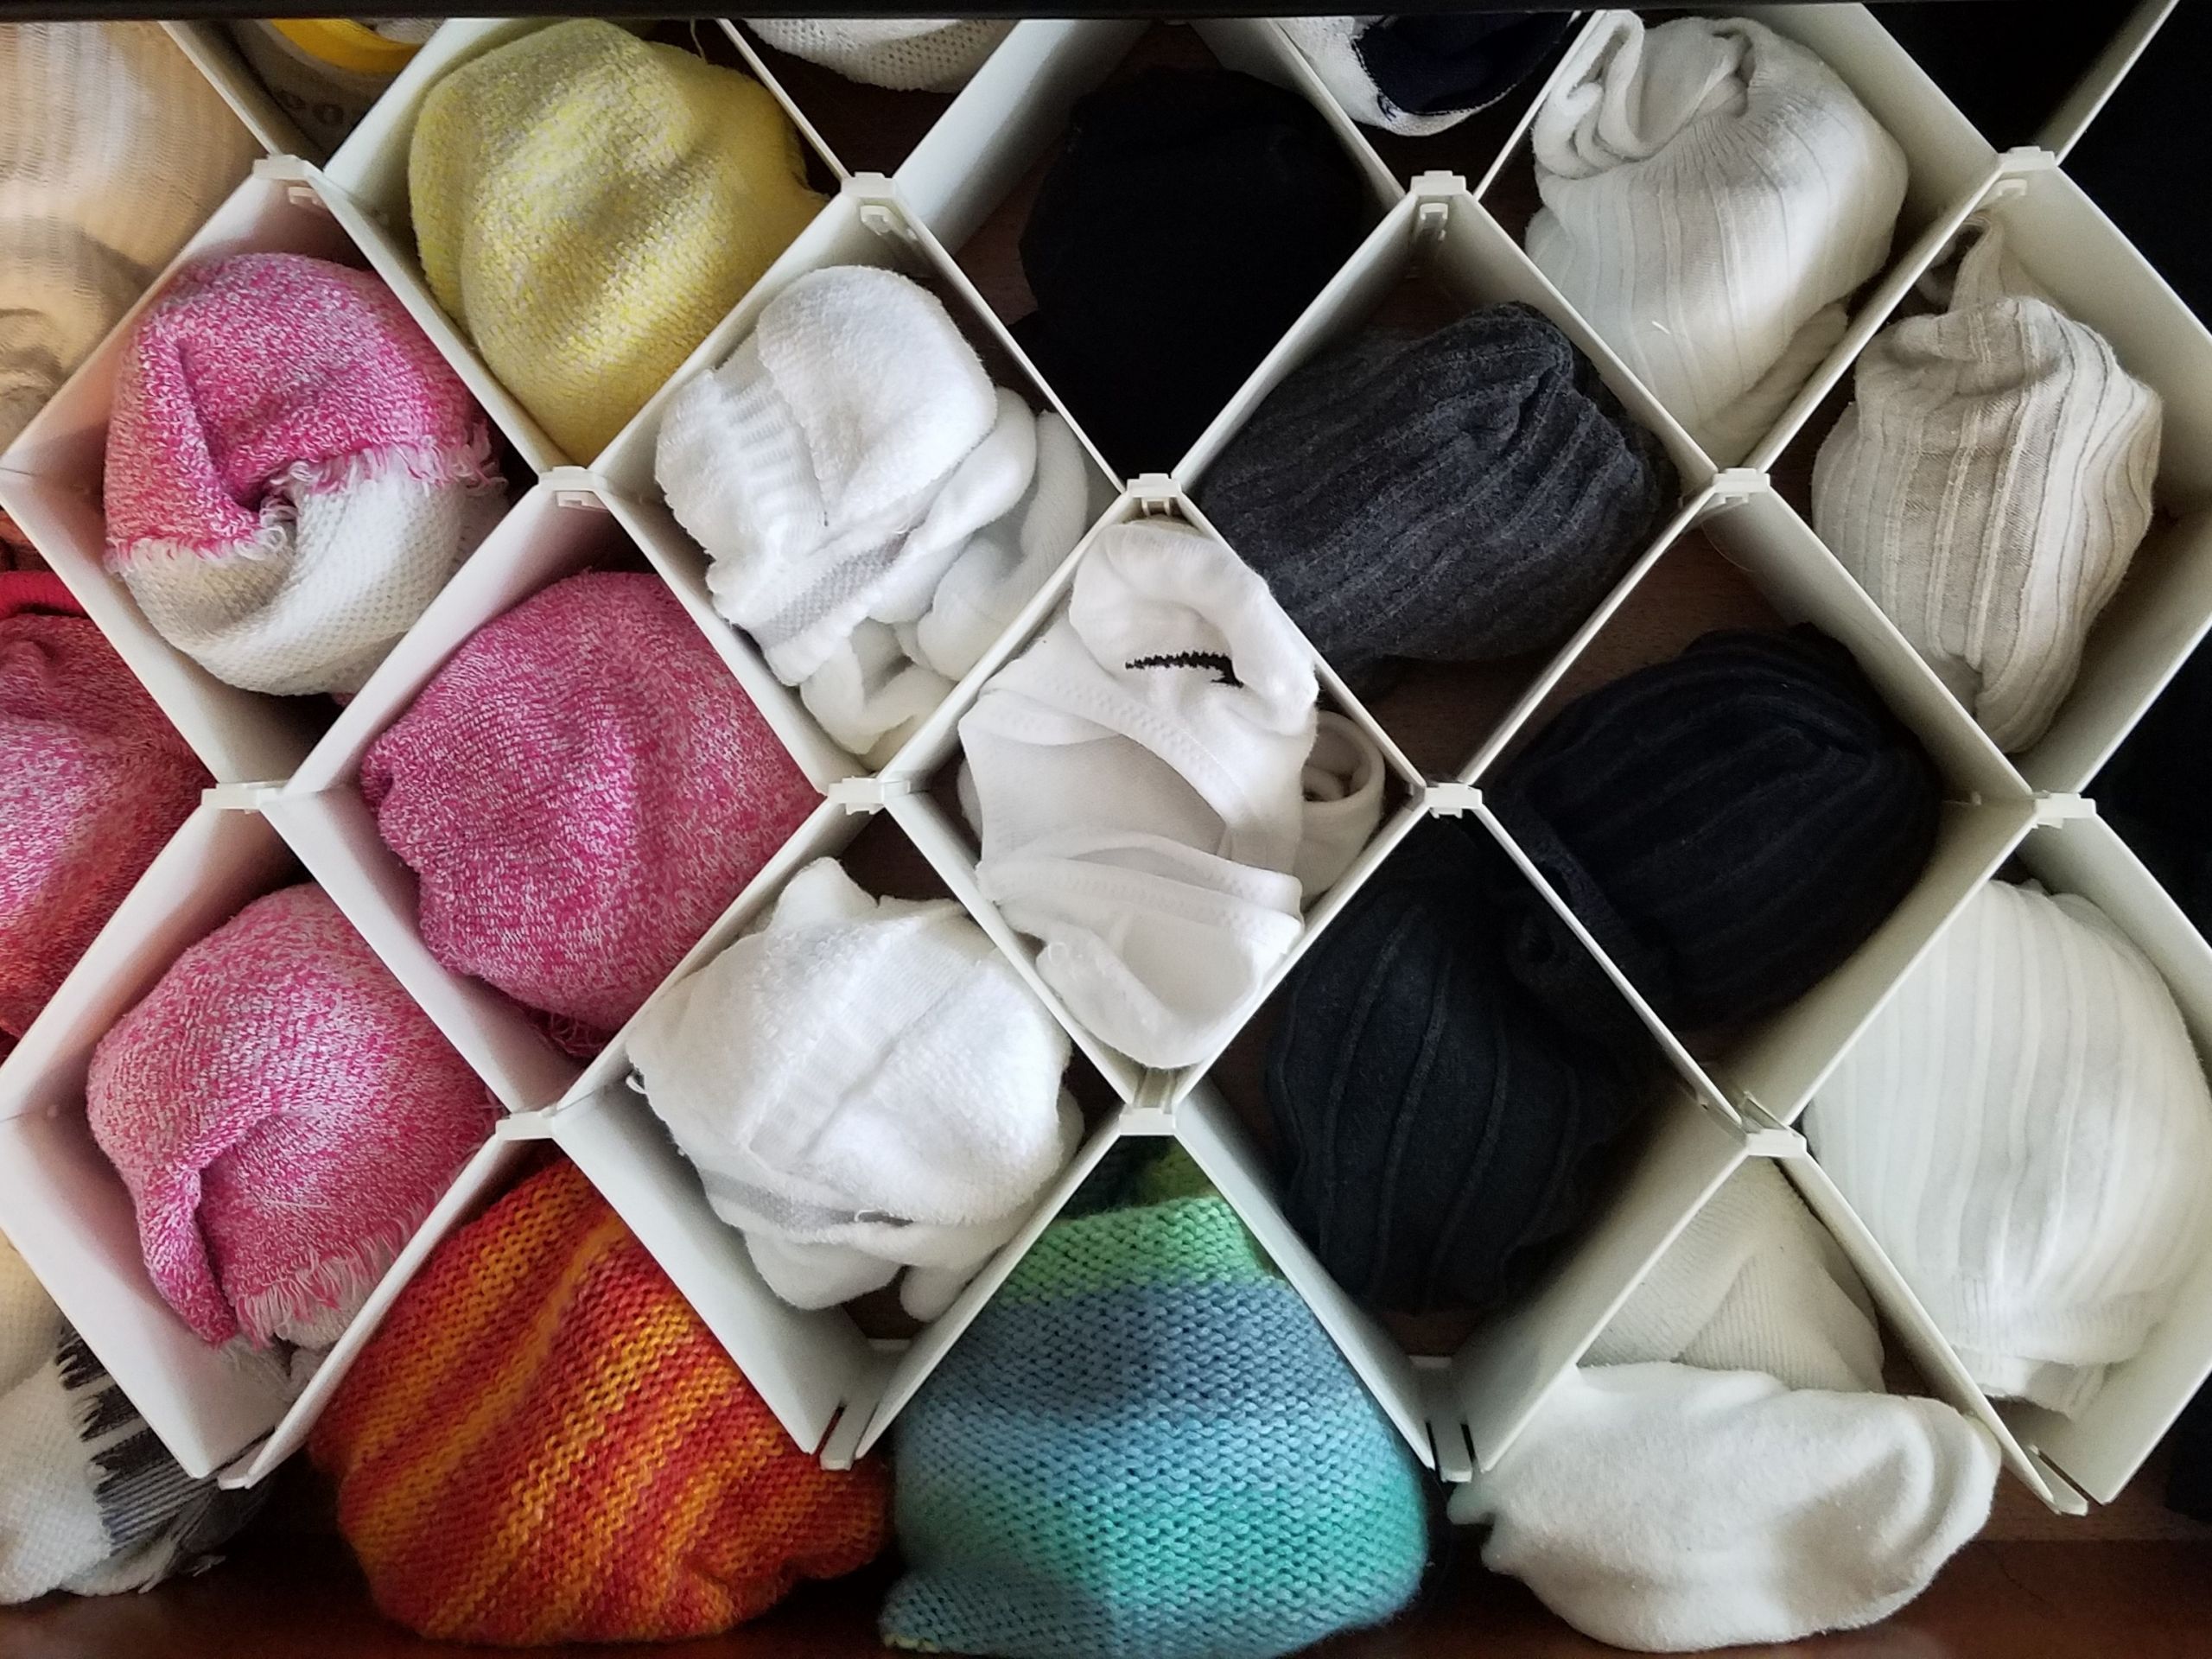 Sock Drawer Organizer DIY
 How to Make Your Sock Drawer Amazing in 10 Minutes or Less